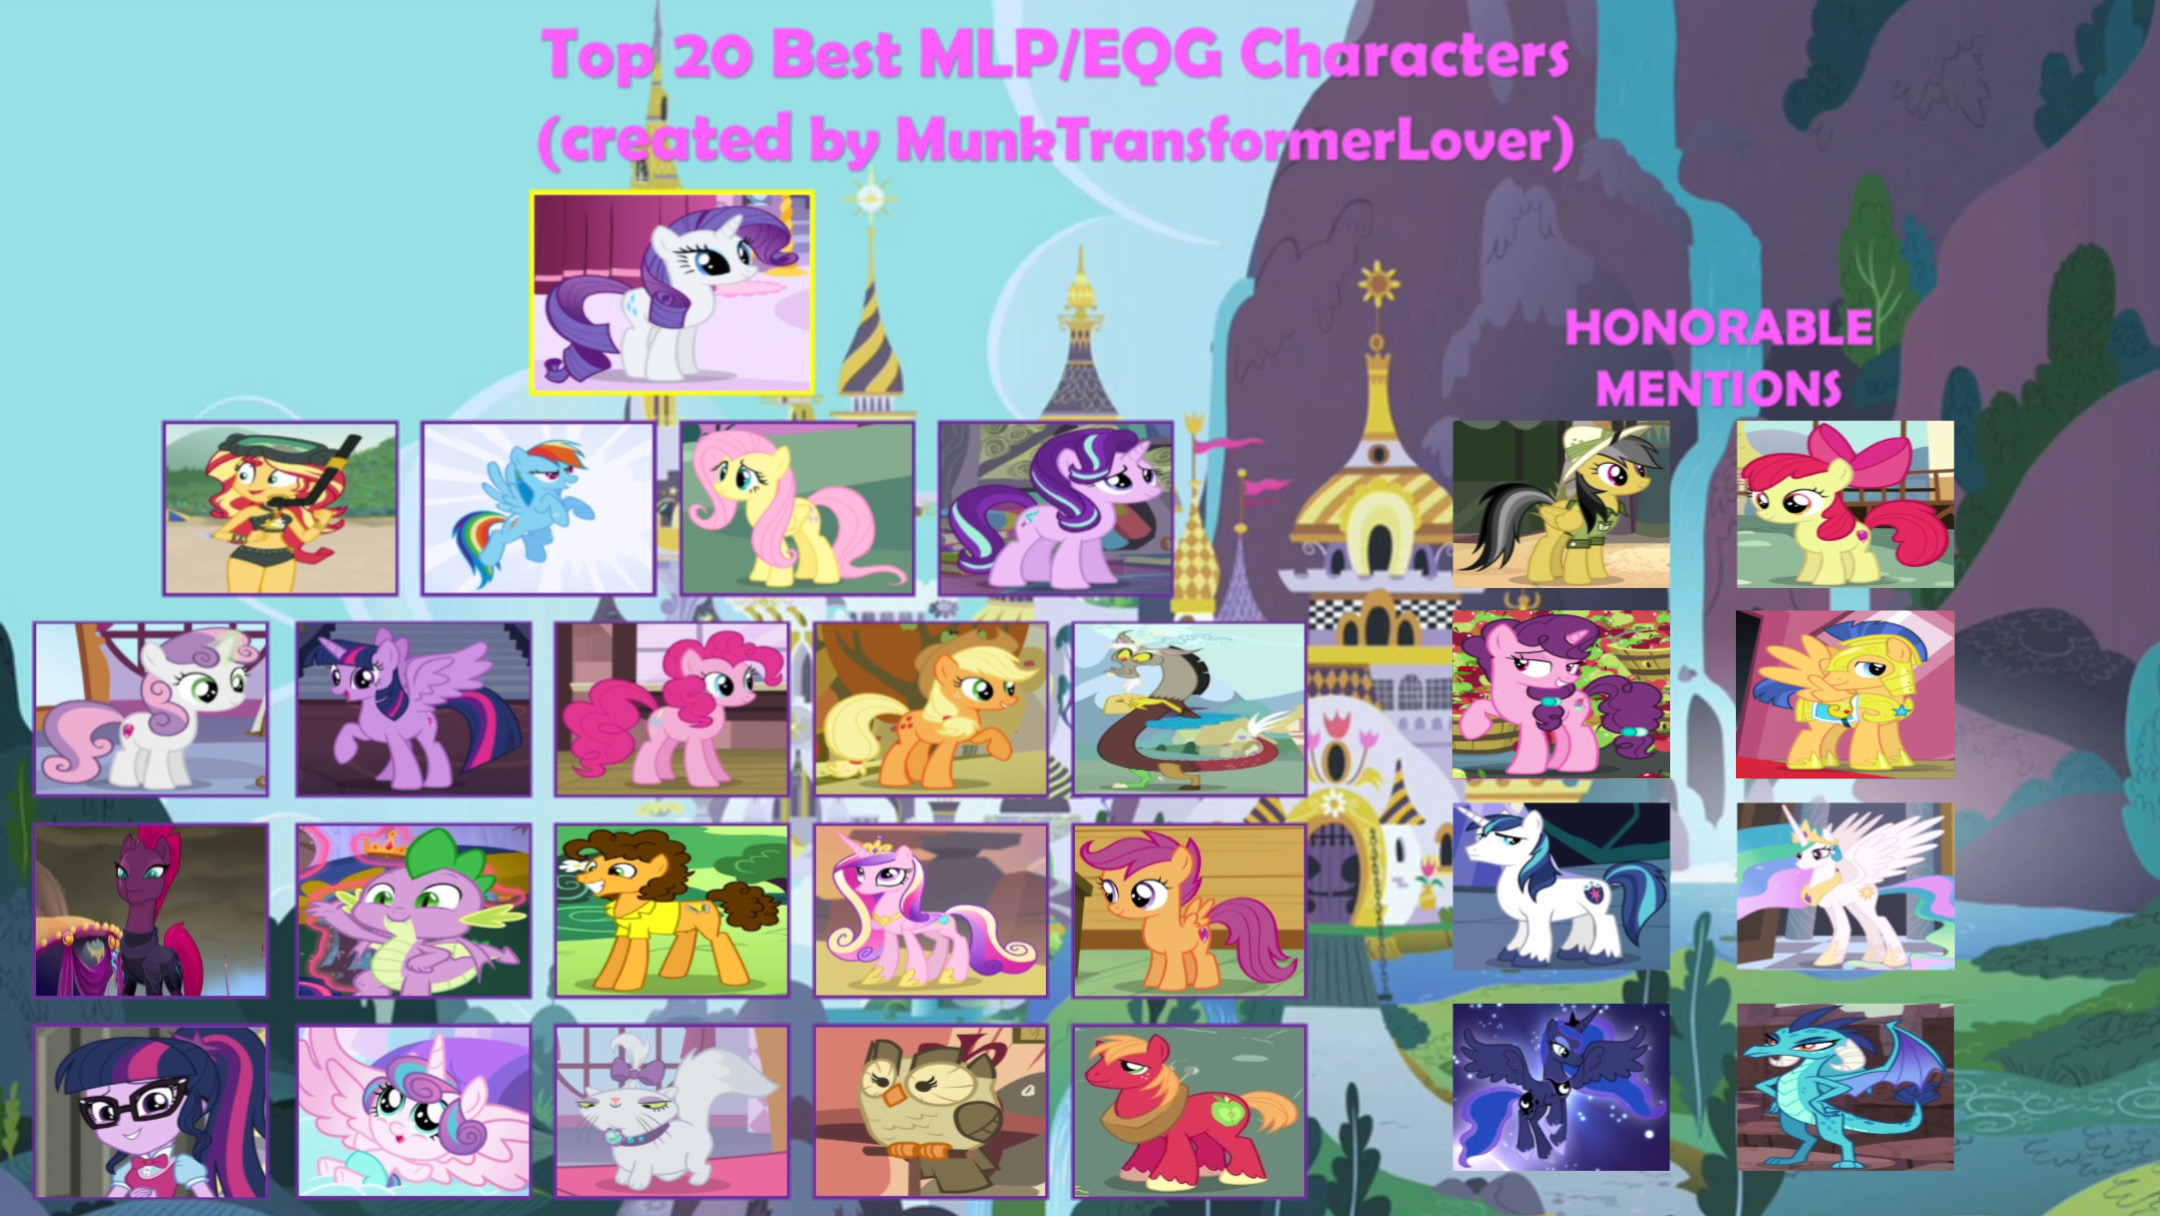 Image of my little pony characters